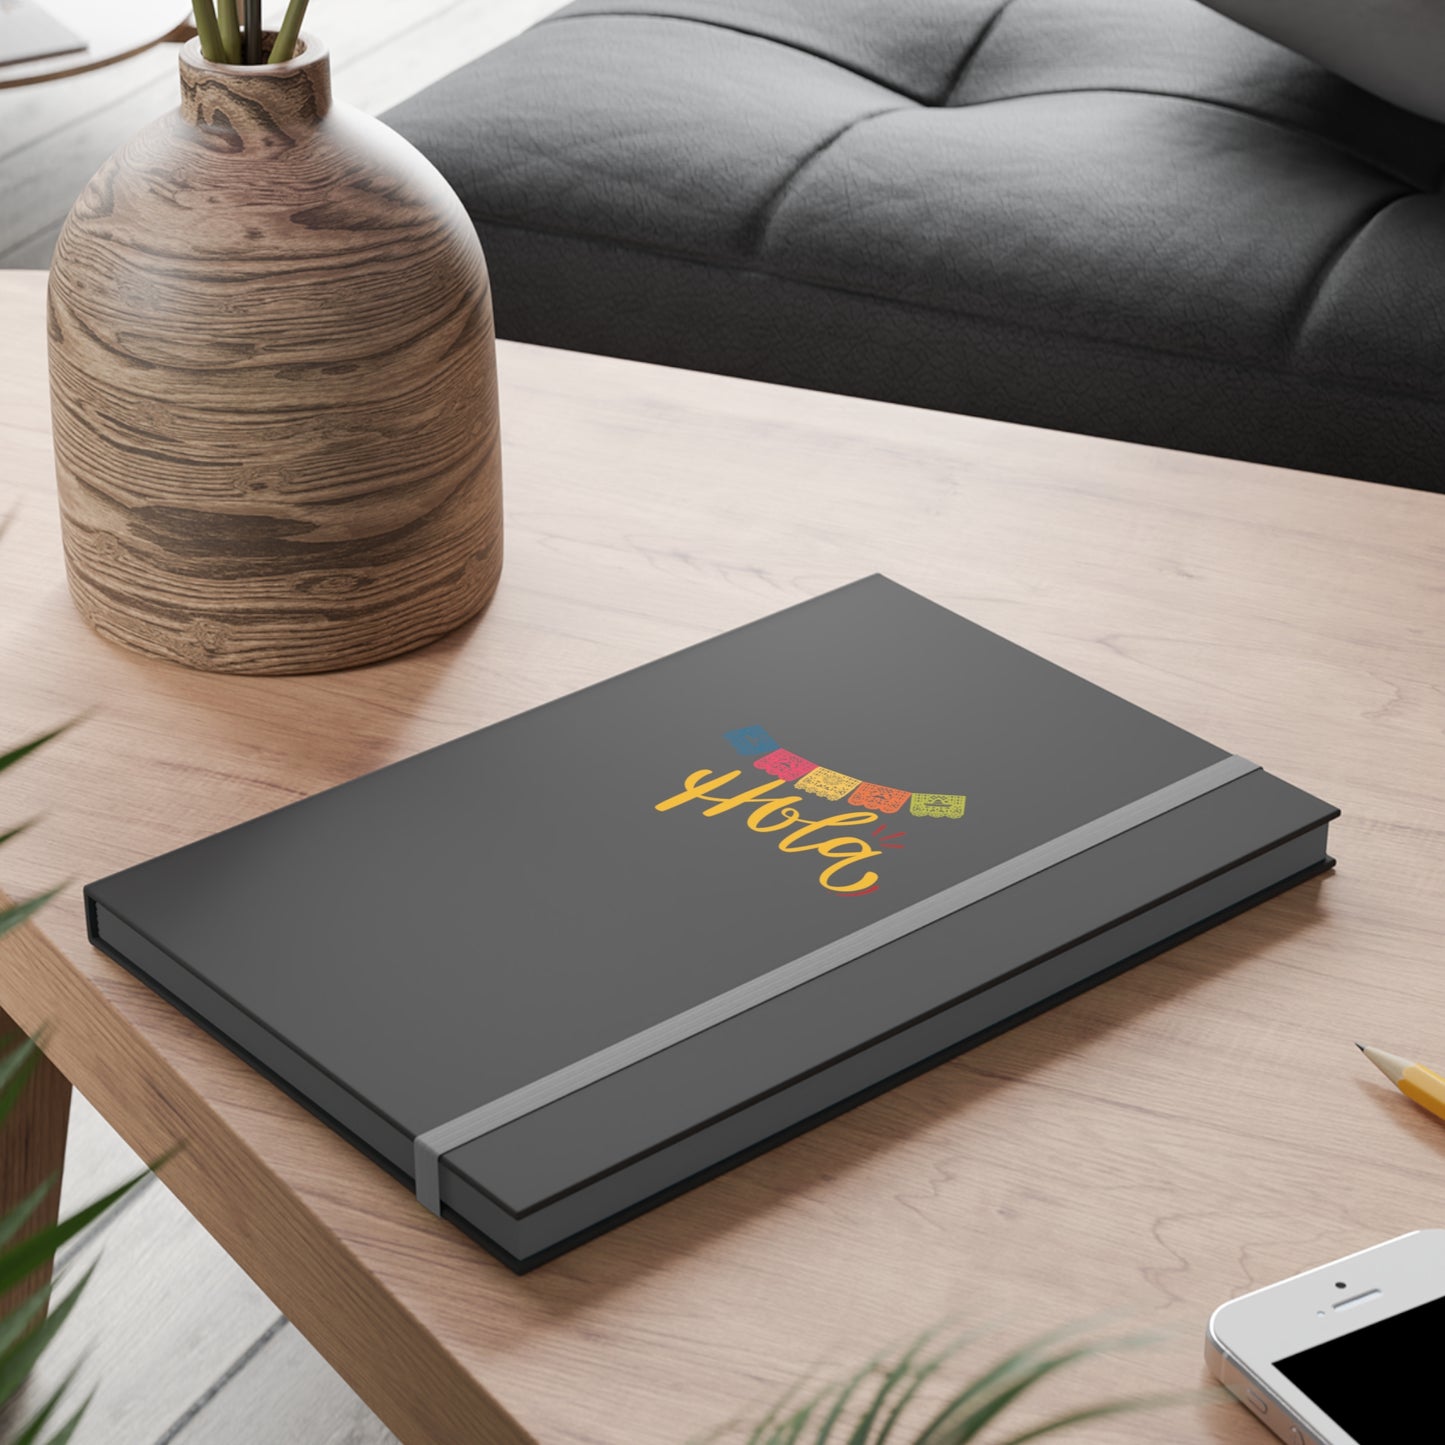 Hola Color Contrast Notebook - Ruled